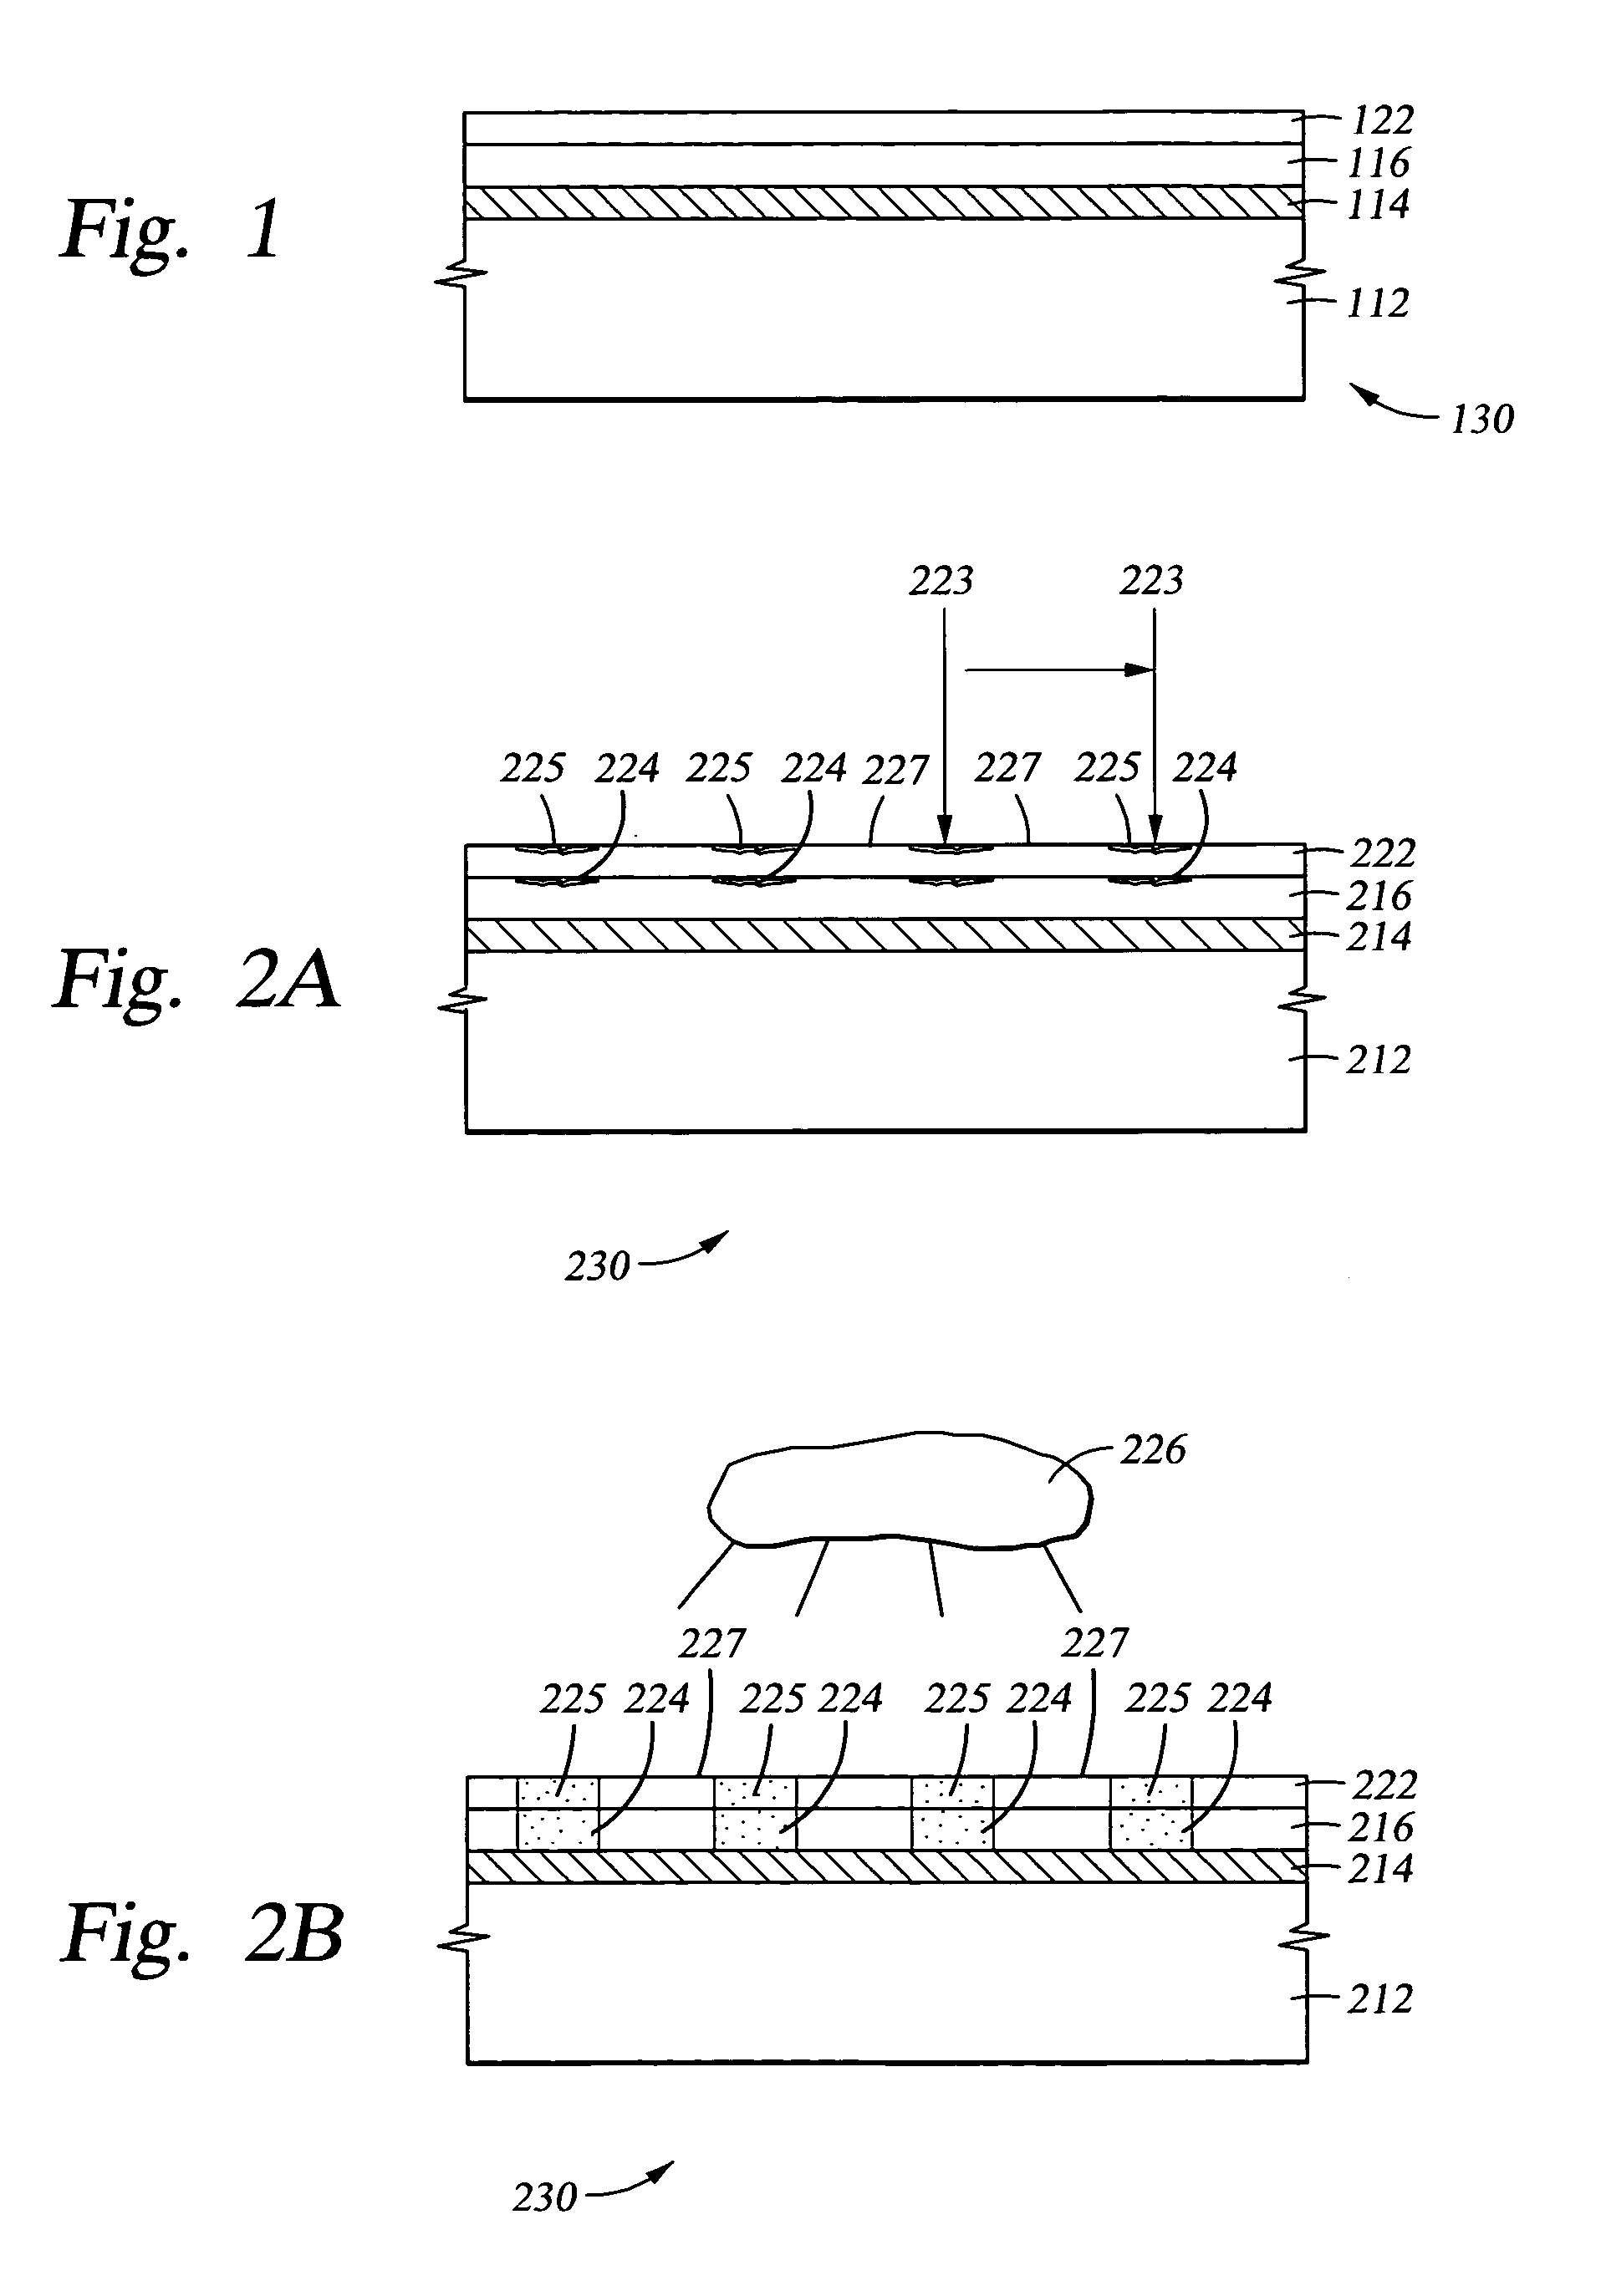 Method of extending the stability of a photoresist during direct writing of an image